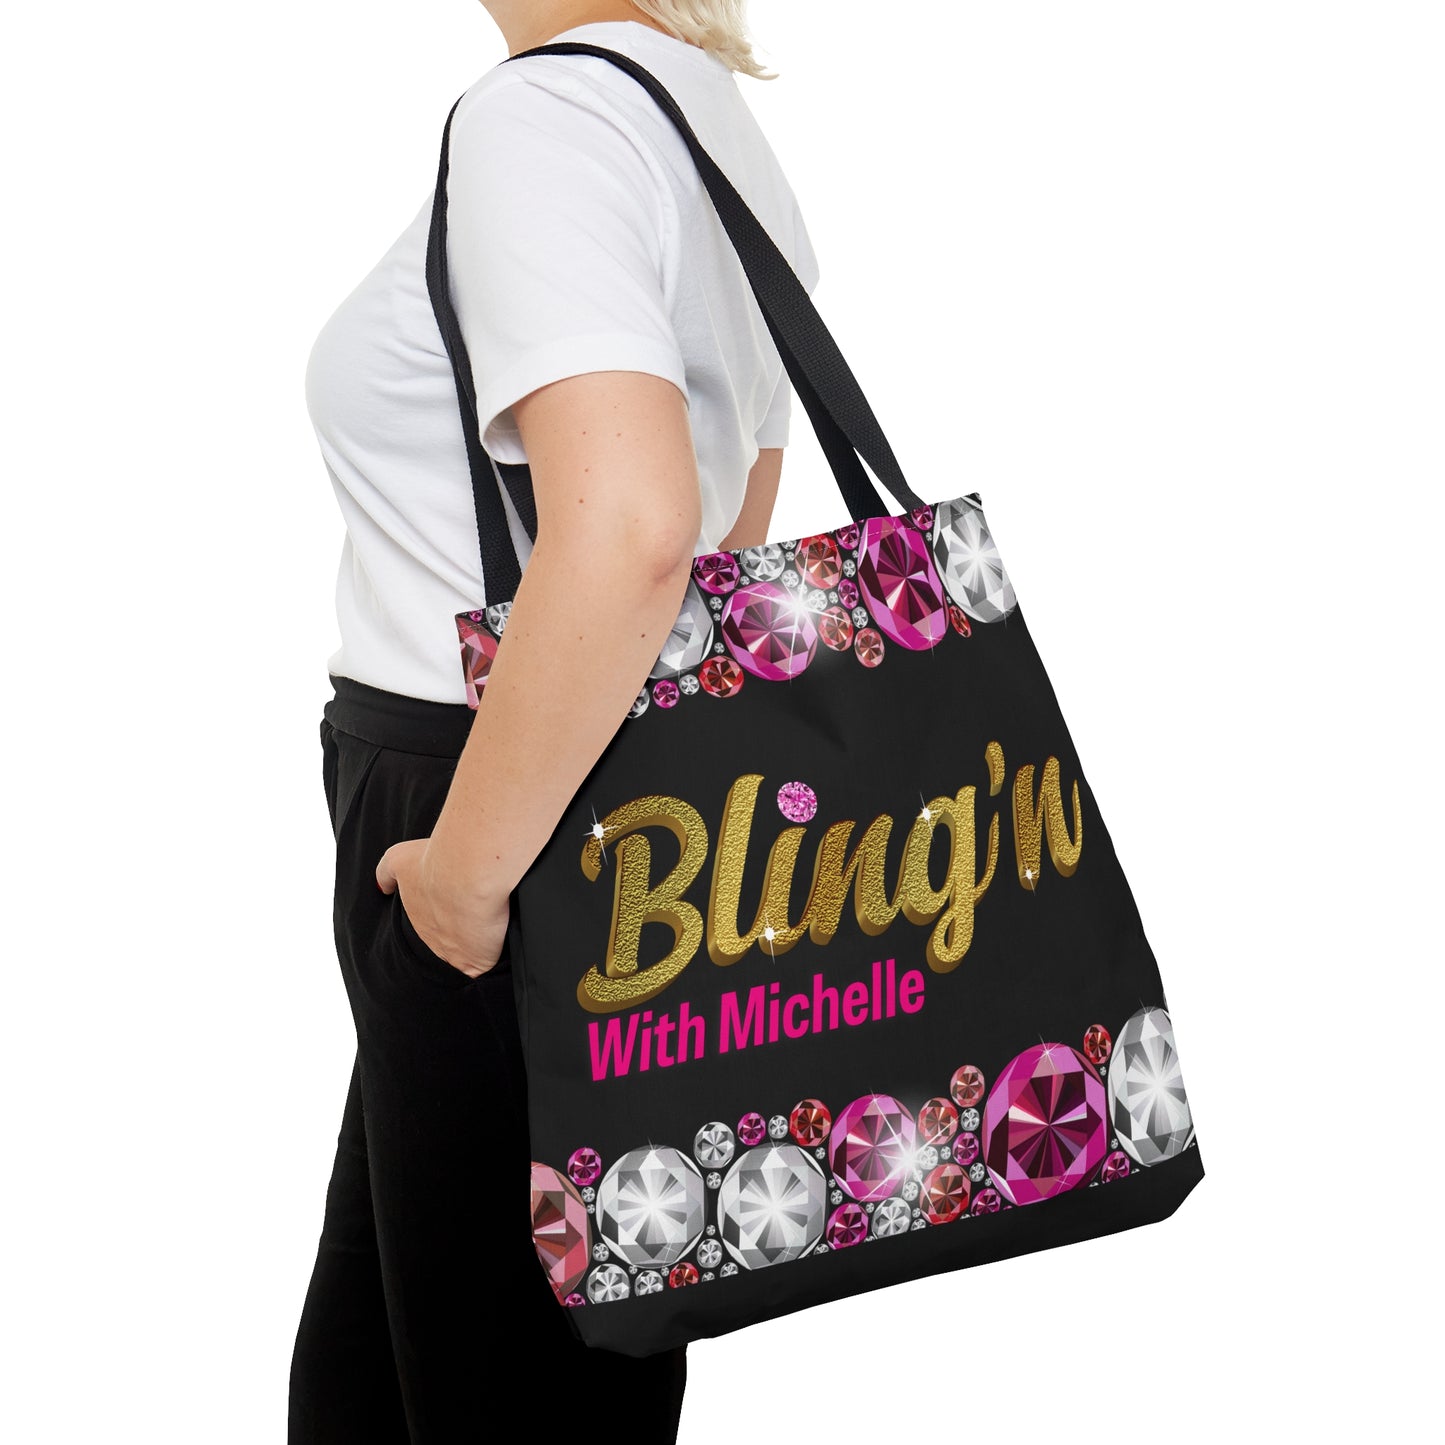 Bling Personalized Tote Bag - 2 sizes